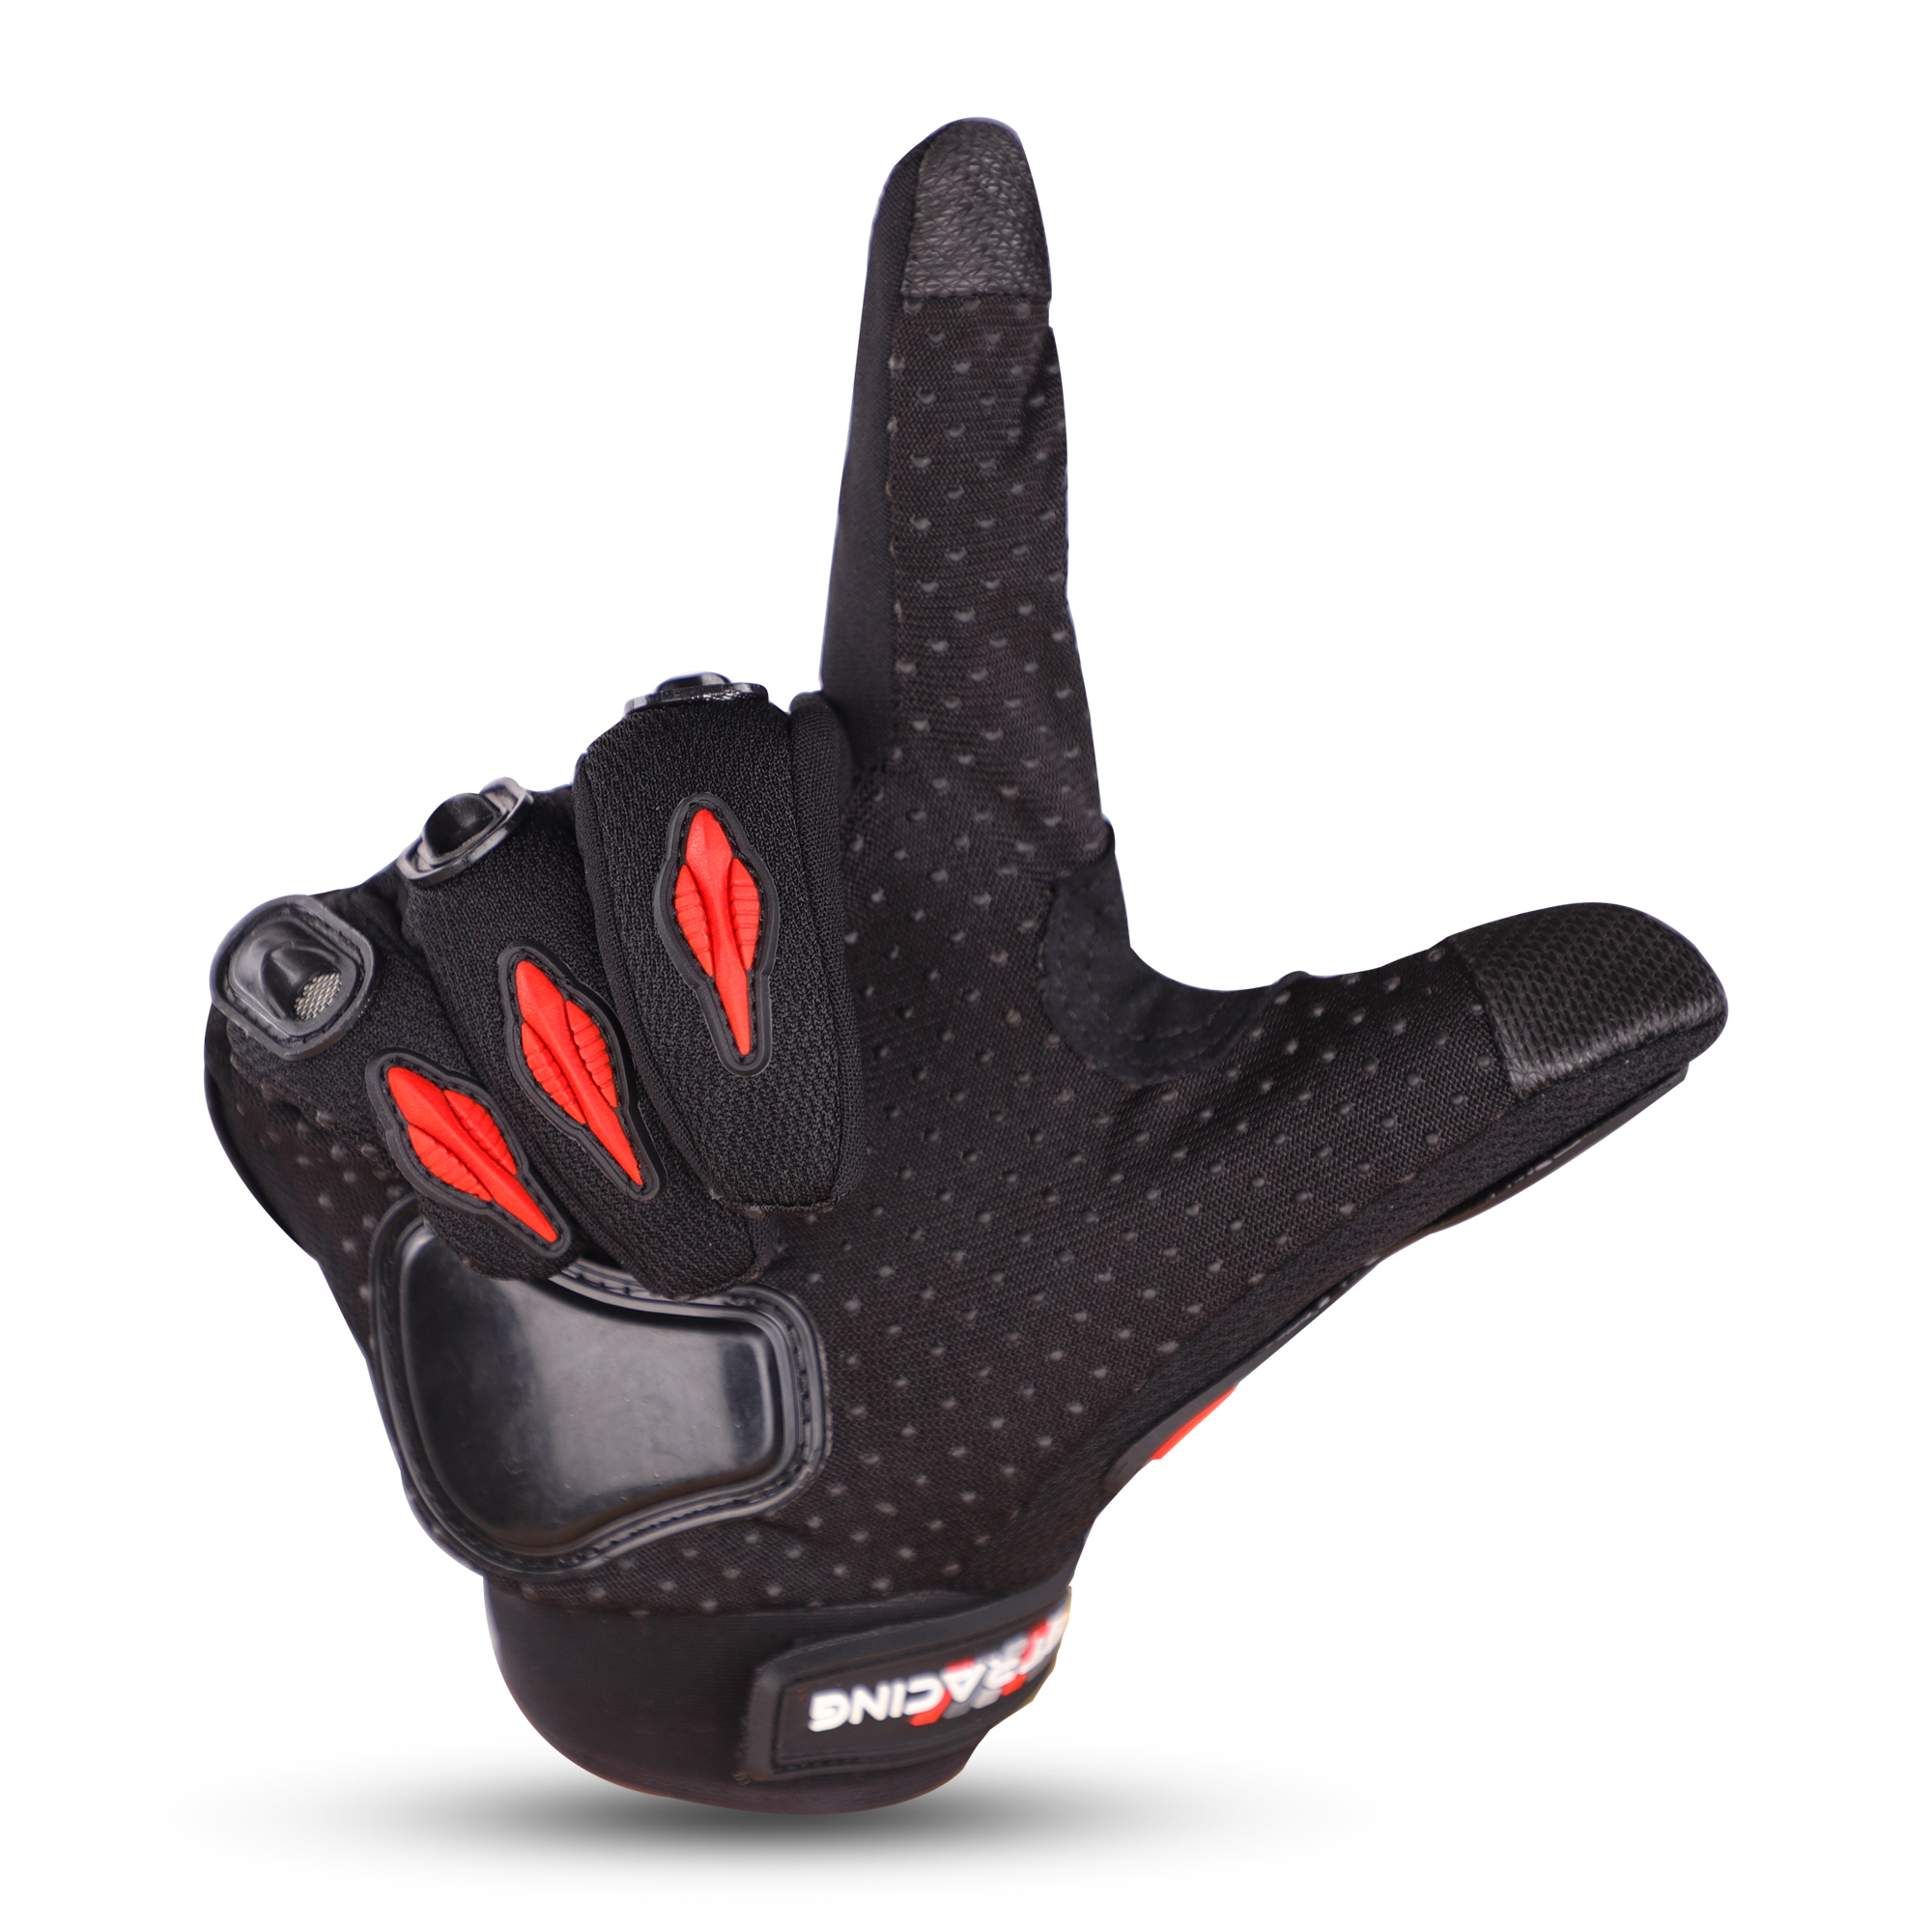 Steelbird GT-01 Full Finger Bike Riding Gloves With Touch Screen Sensitivity At Thumb And Index Finger, Protective Off-Road Motorbike Racing (Red)